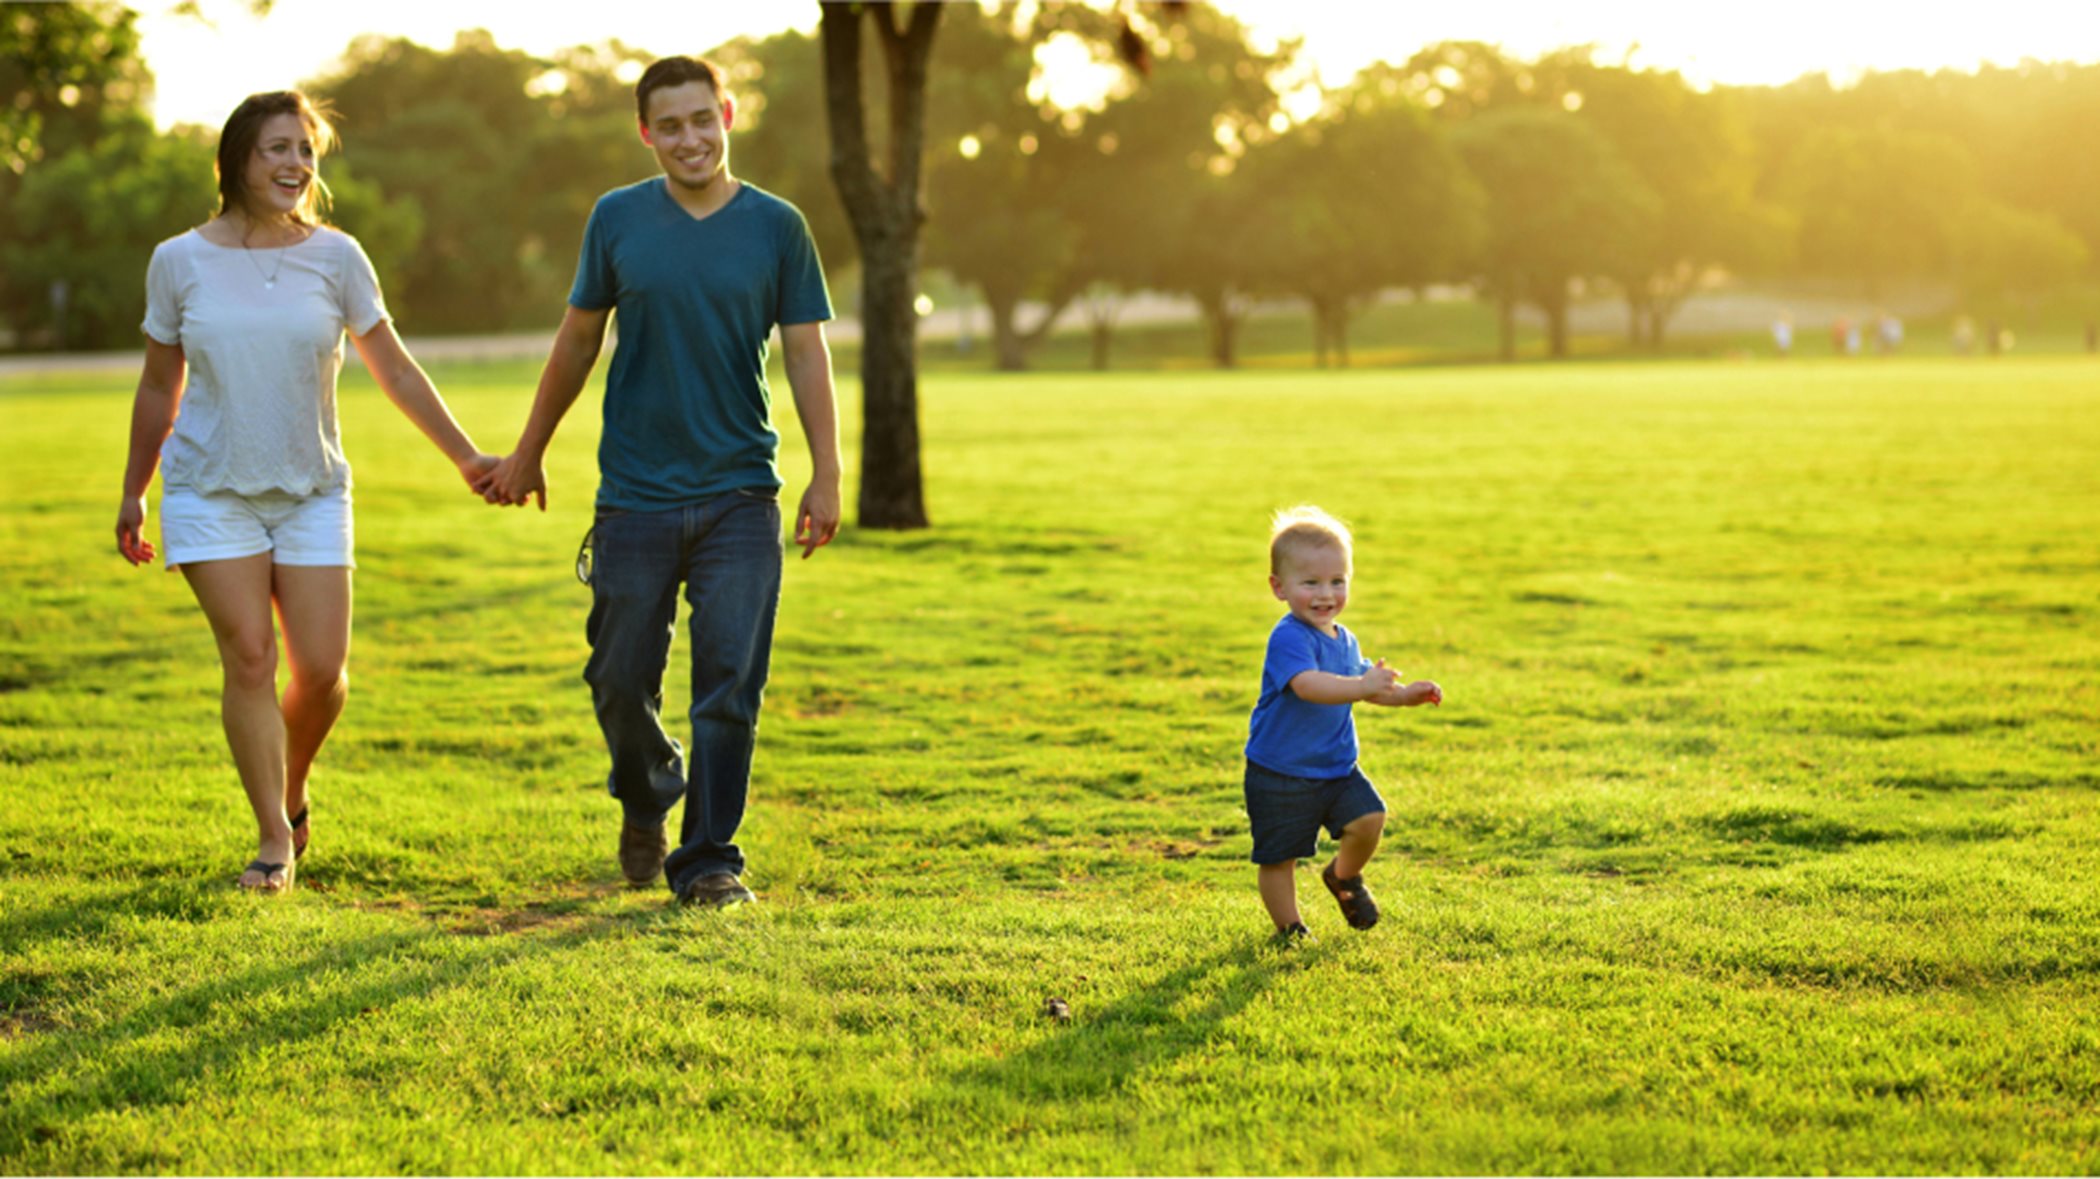 Couple walking with child running